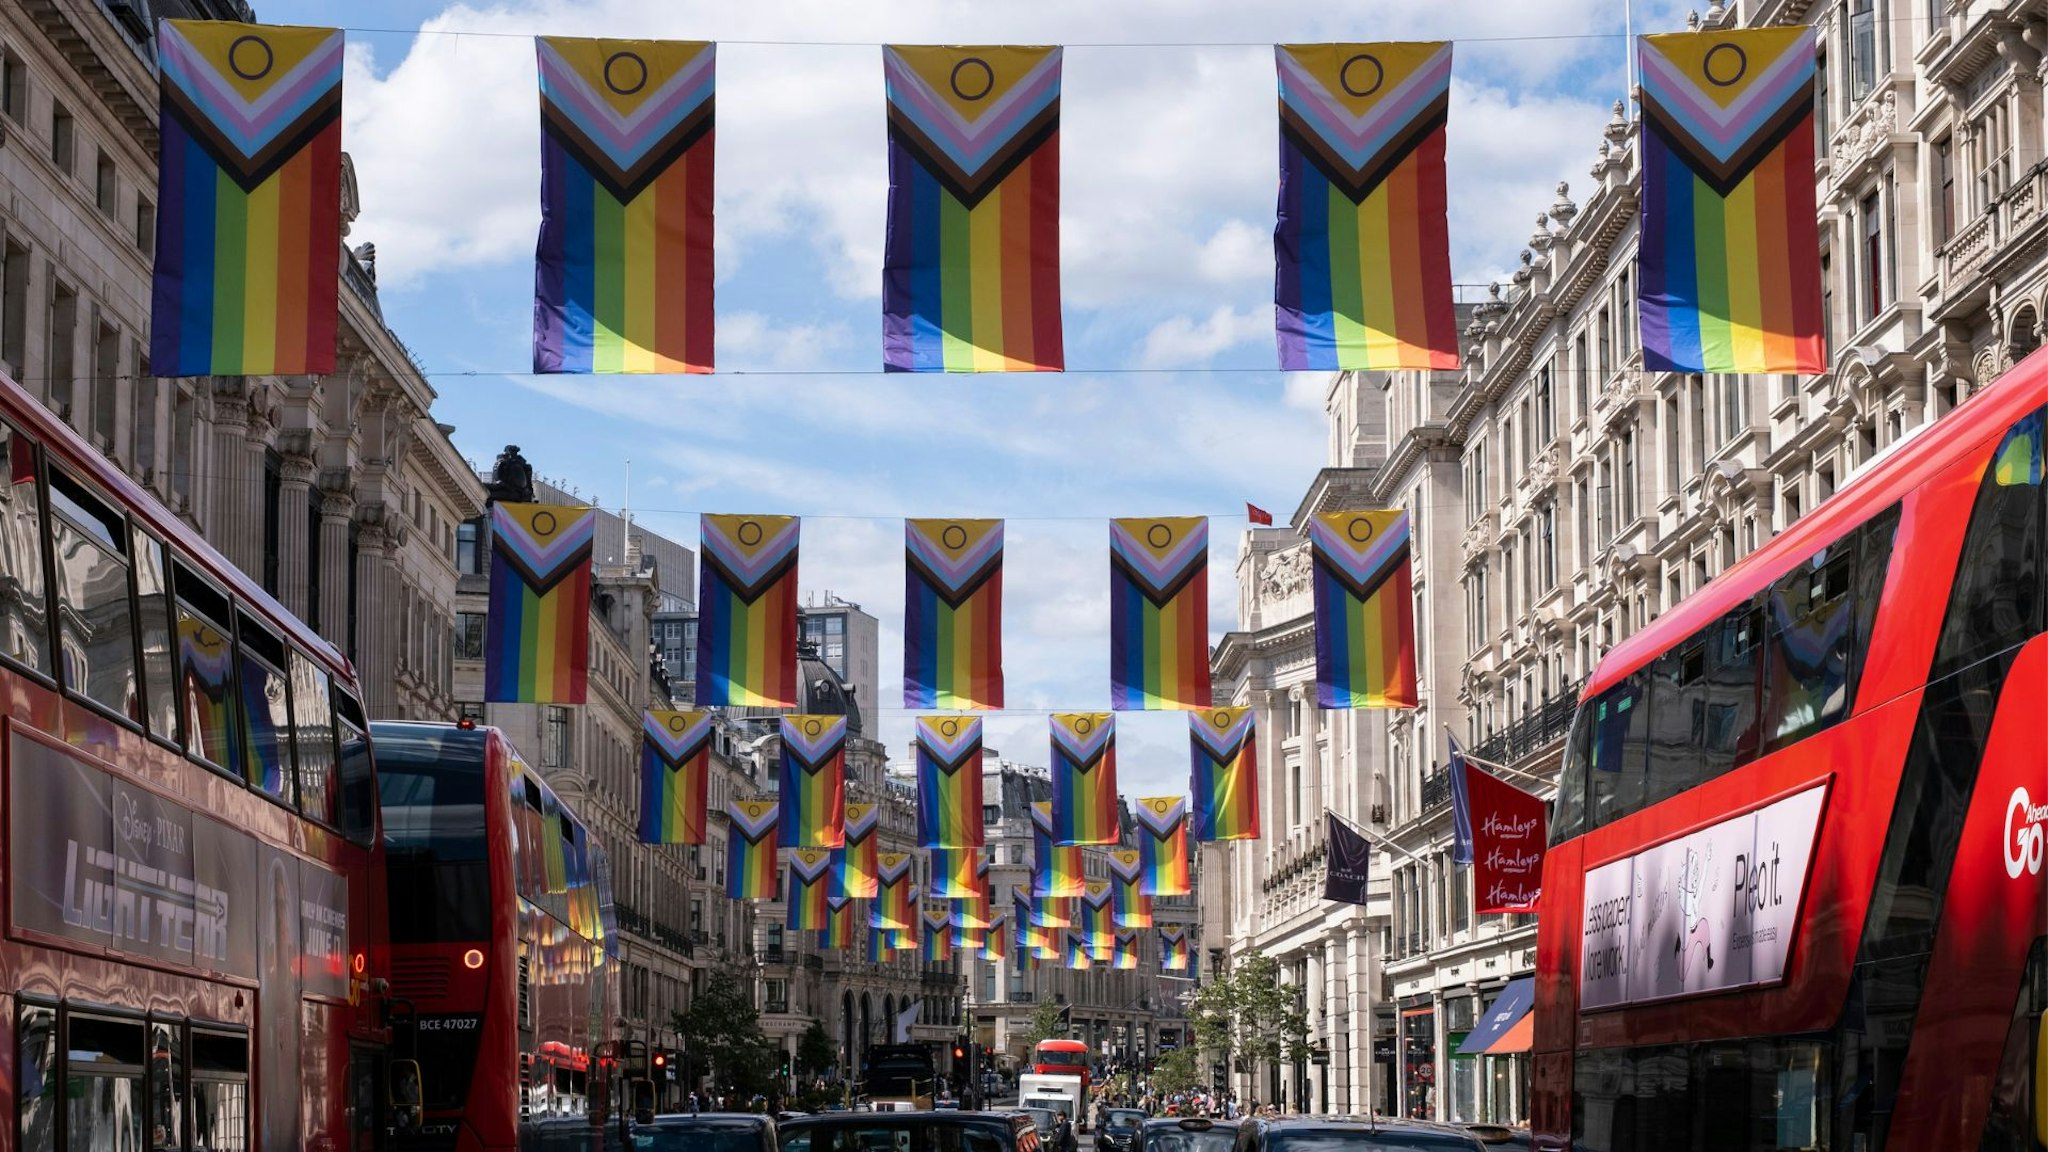 Intersex Inclusive Pride flags high above Regent Street in advance of the Pride in London parade on 28th June 2022 in London, United Kingdom. The flag includes stripes to represent LGBTQ+ communities, with colors from the Transgender Pride Flag, alongside the and circle of the Intersex flag.